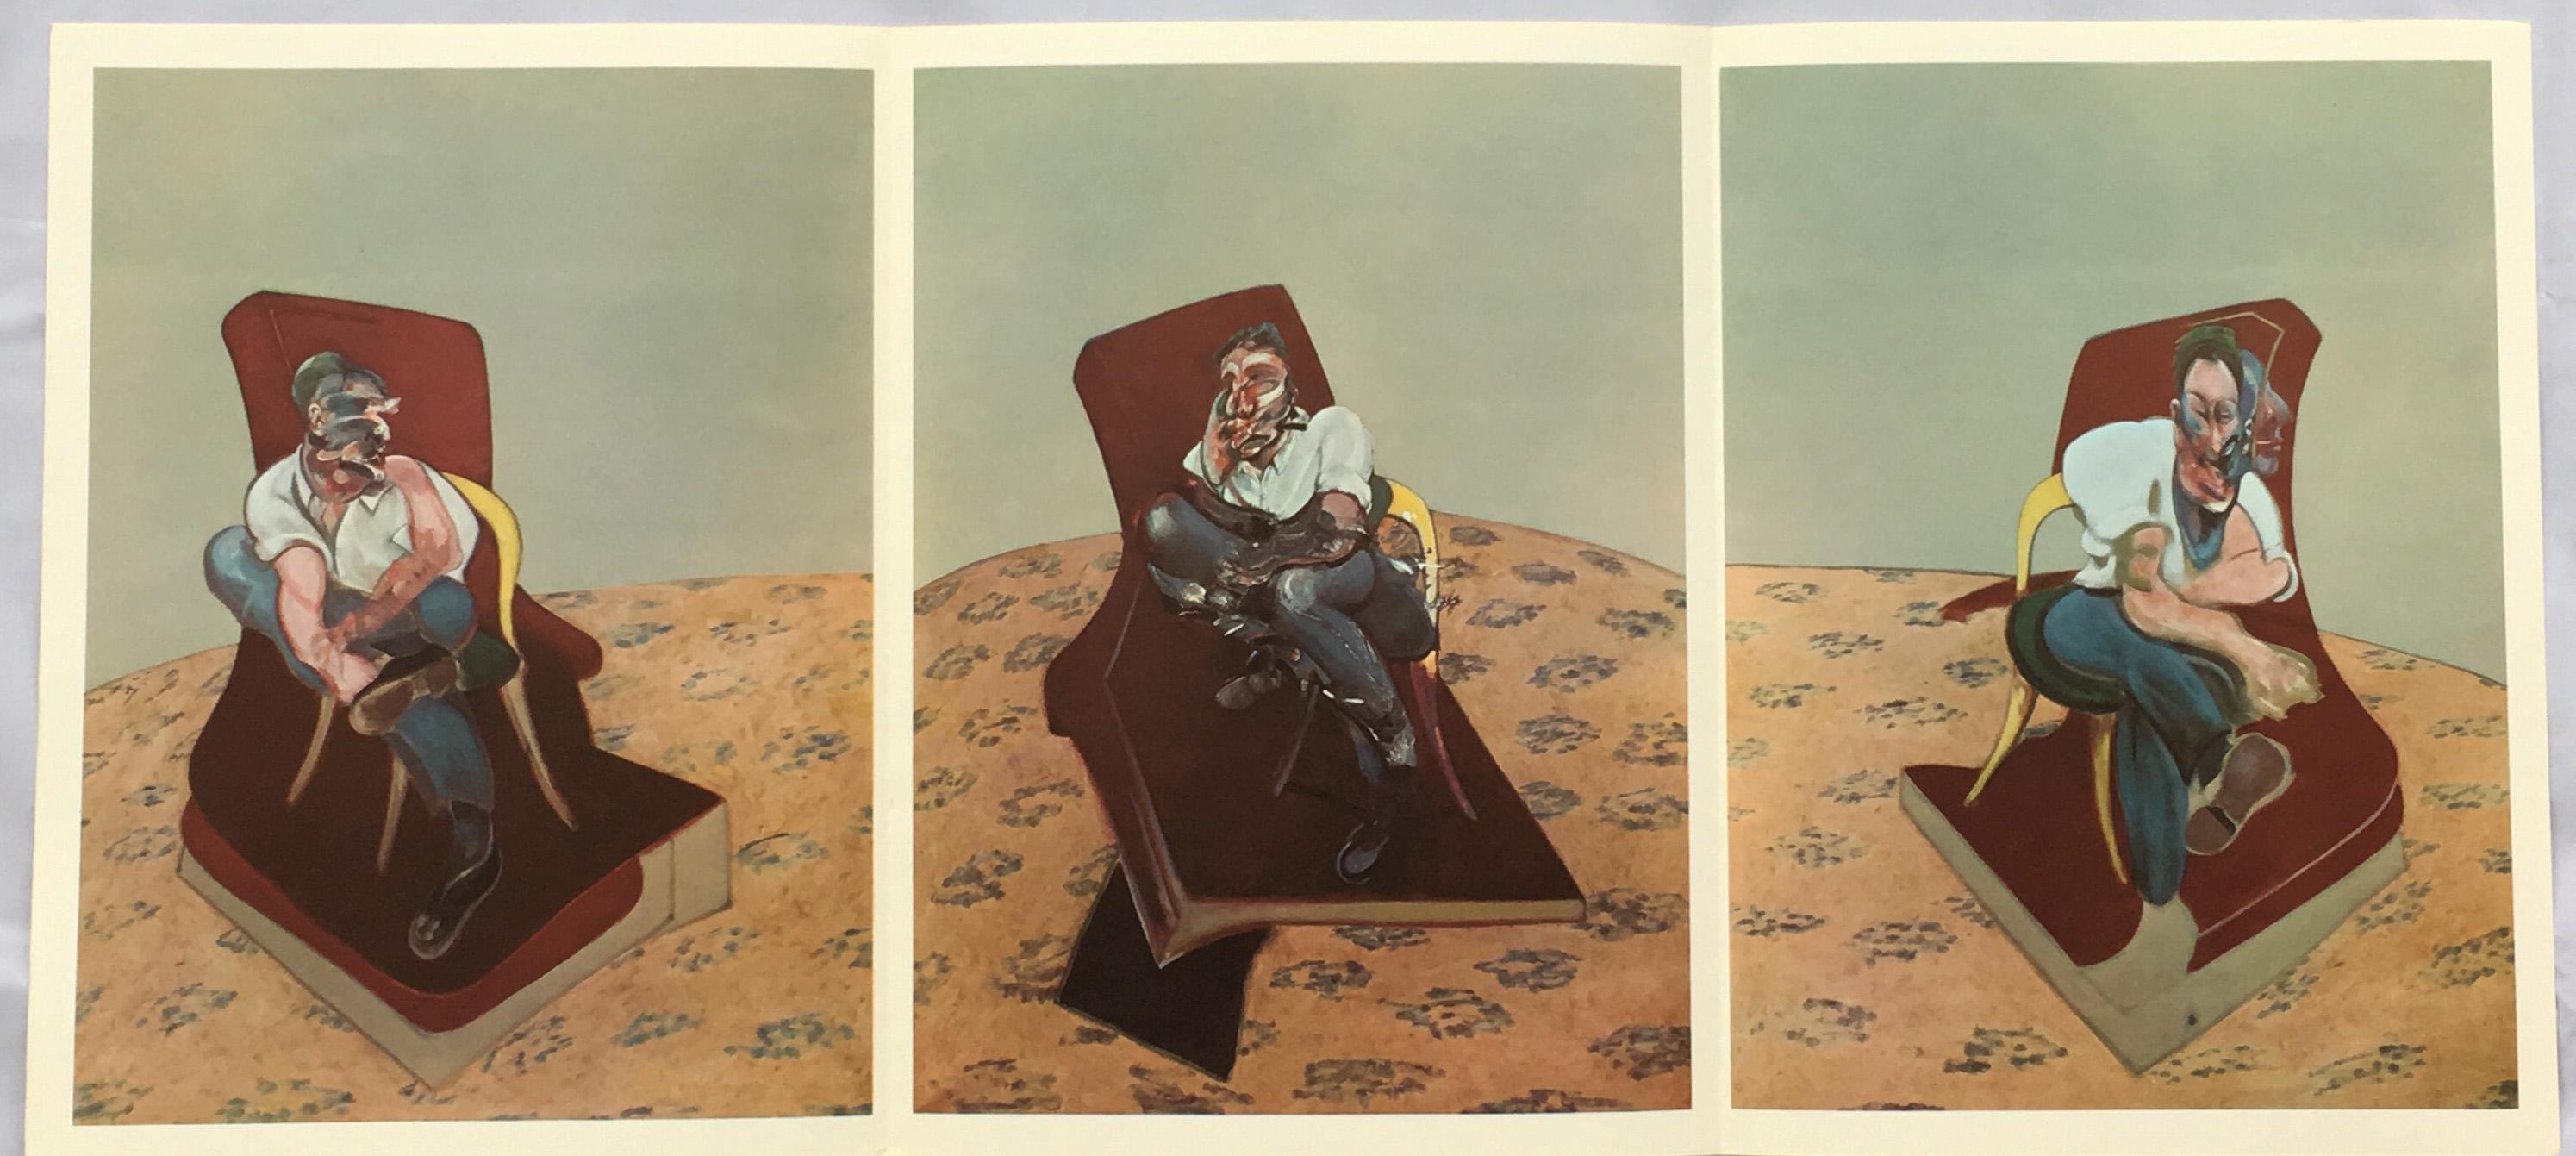 Francis Bacon Three Studies for Portrait of Lucian Freud (lithograph)  1